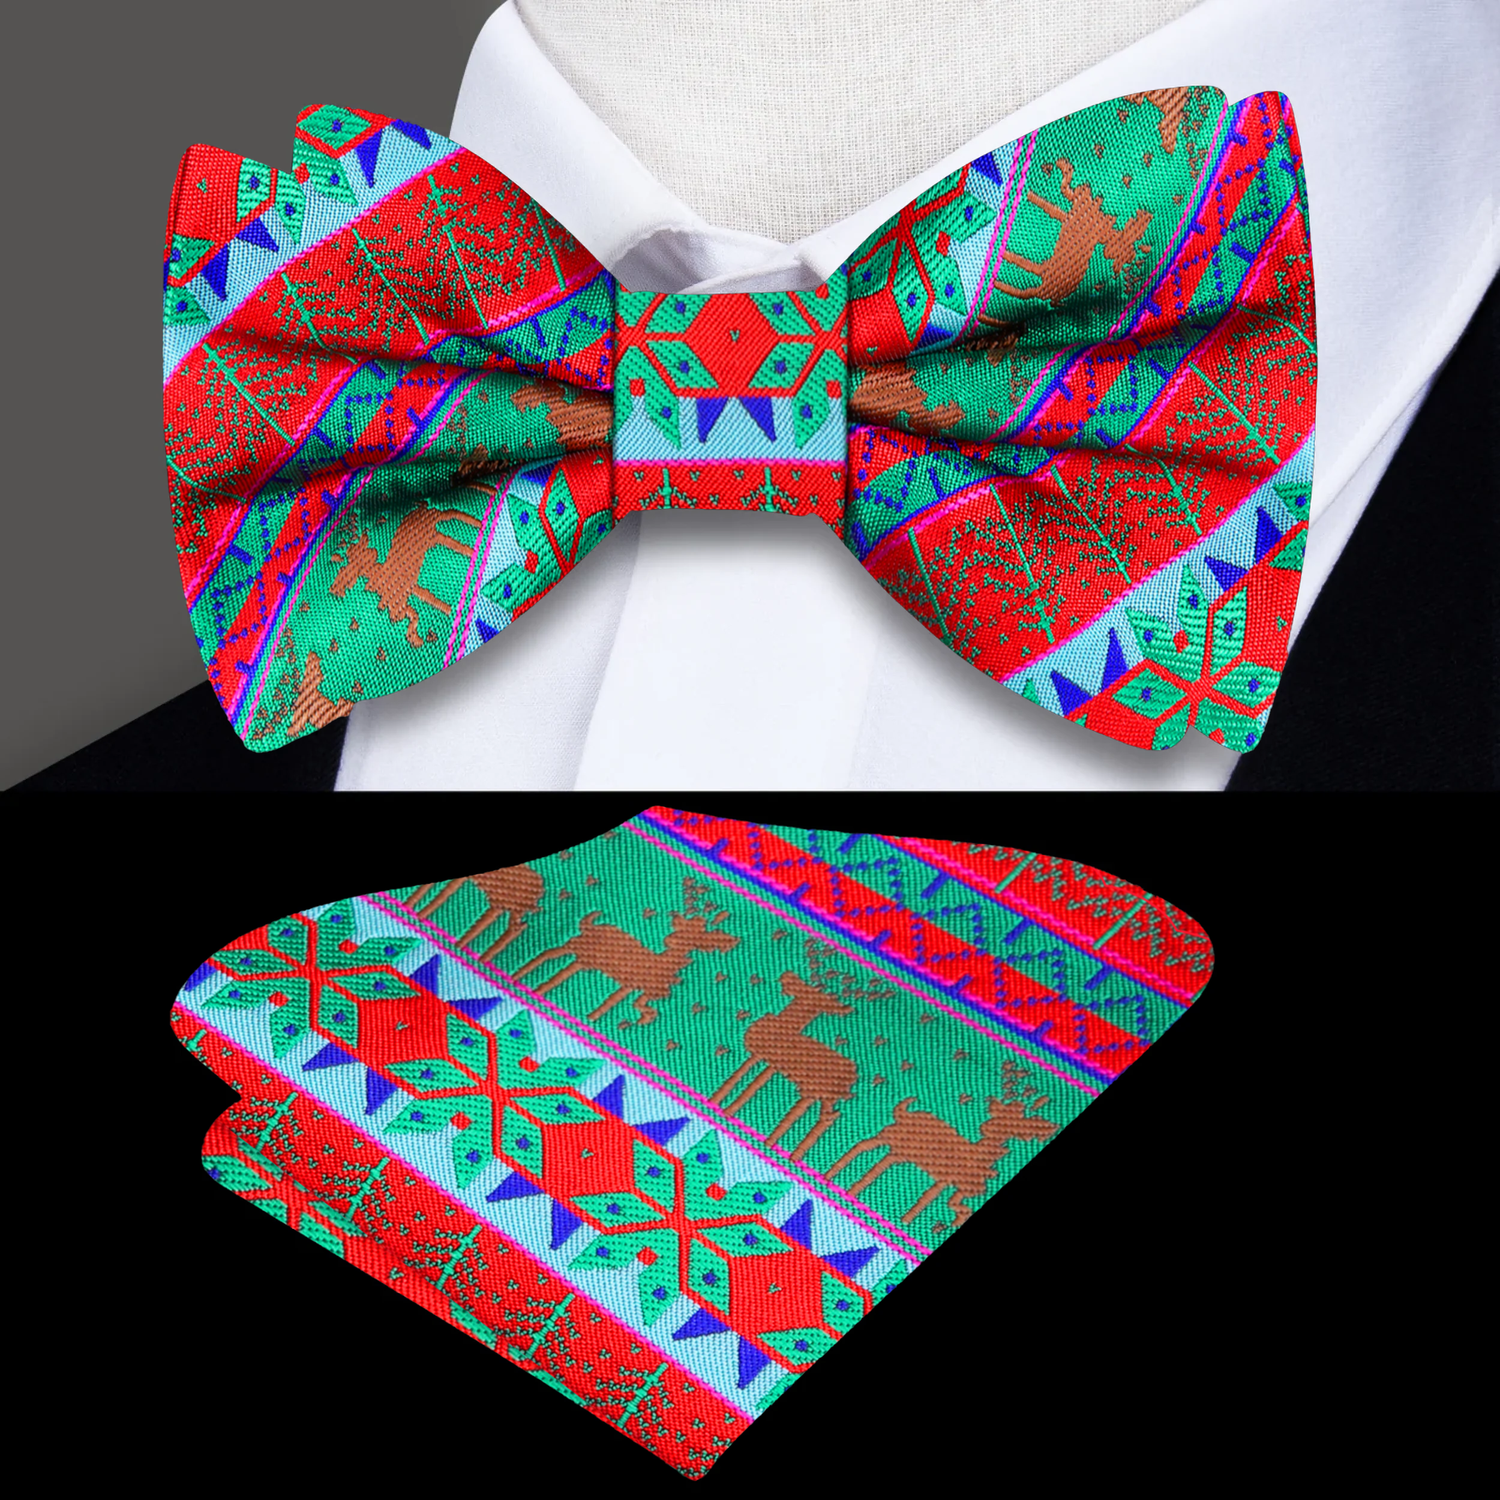 View 1 Red Green Reindeer Snow Flake Christmas Tree Bow Tie and Square